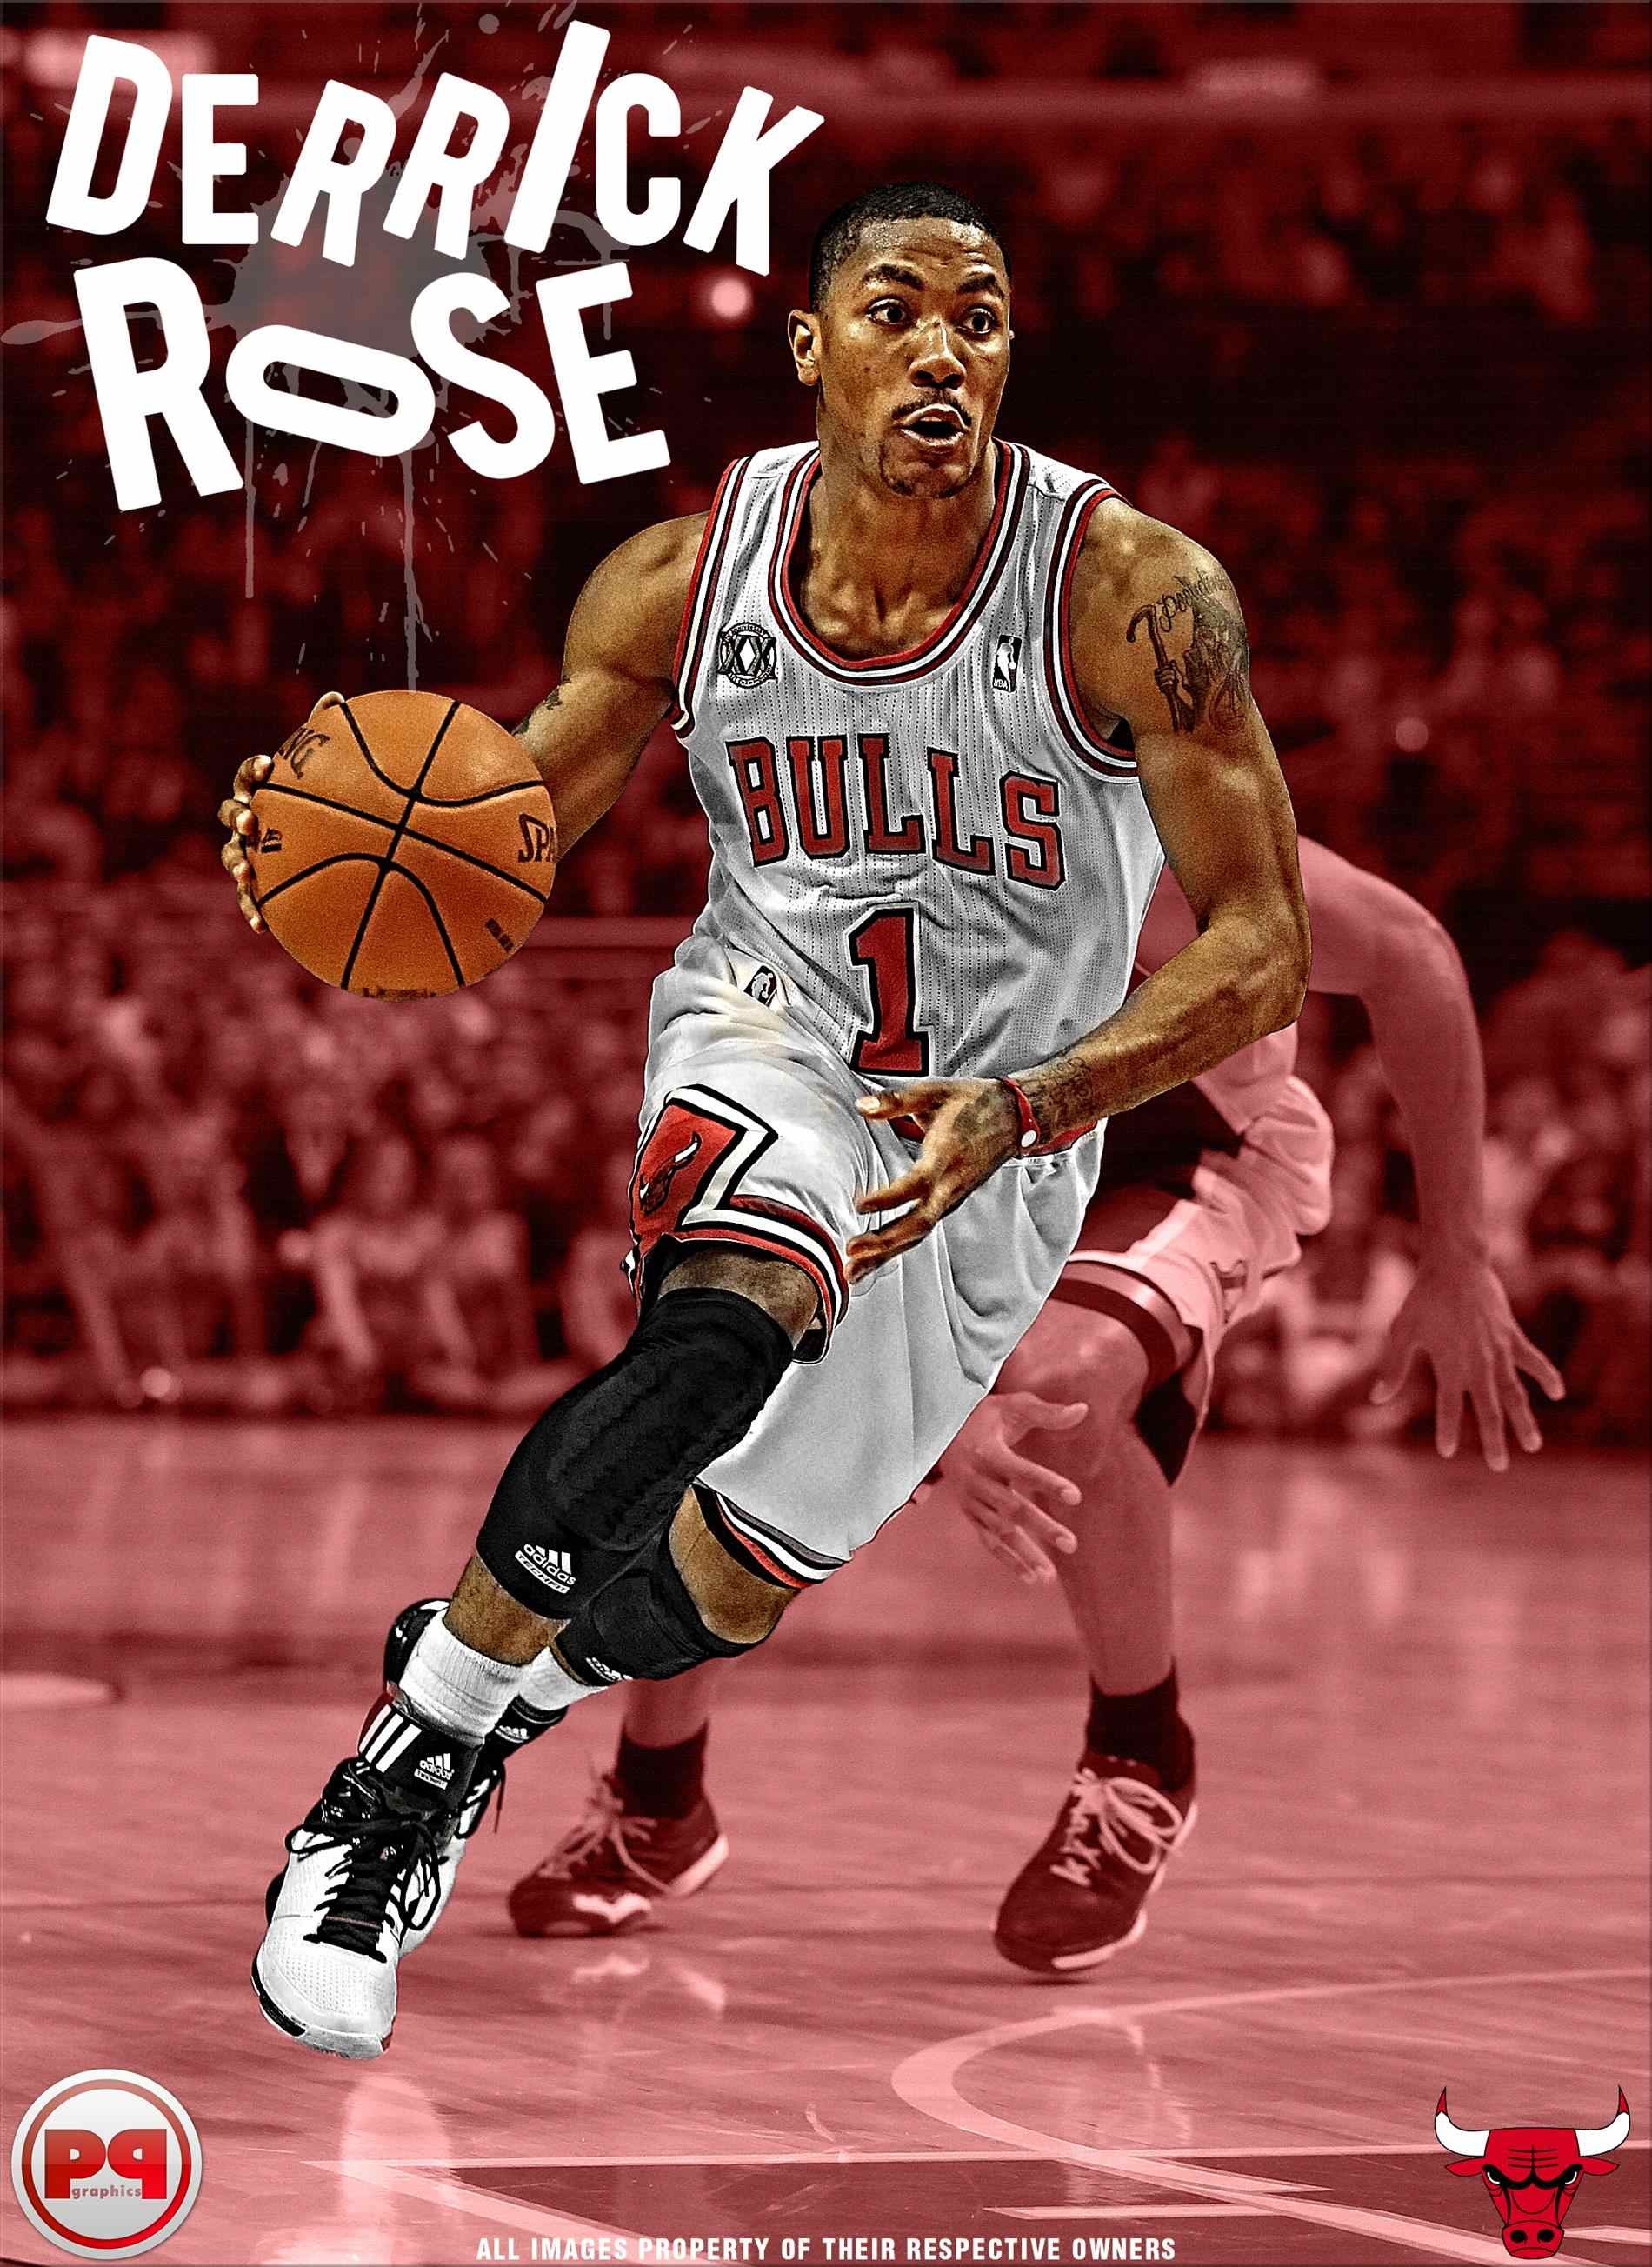 1900x2607 ... Quotes 2016 rose hd wallpapers wallpaper cave derrick derrick rose  quotes 2016 rose wallpapers hd wallpaper ...